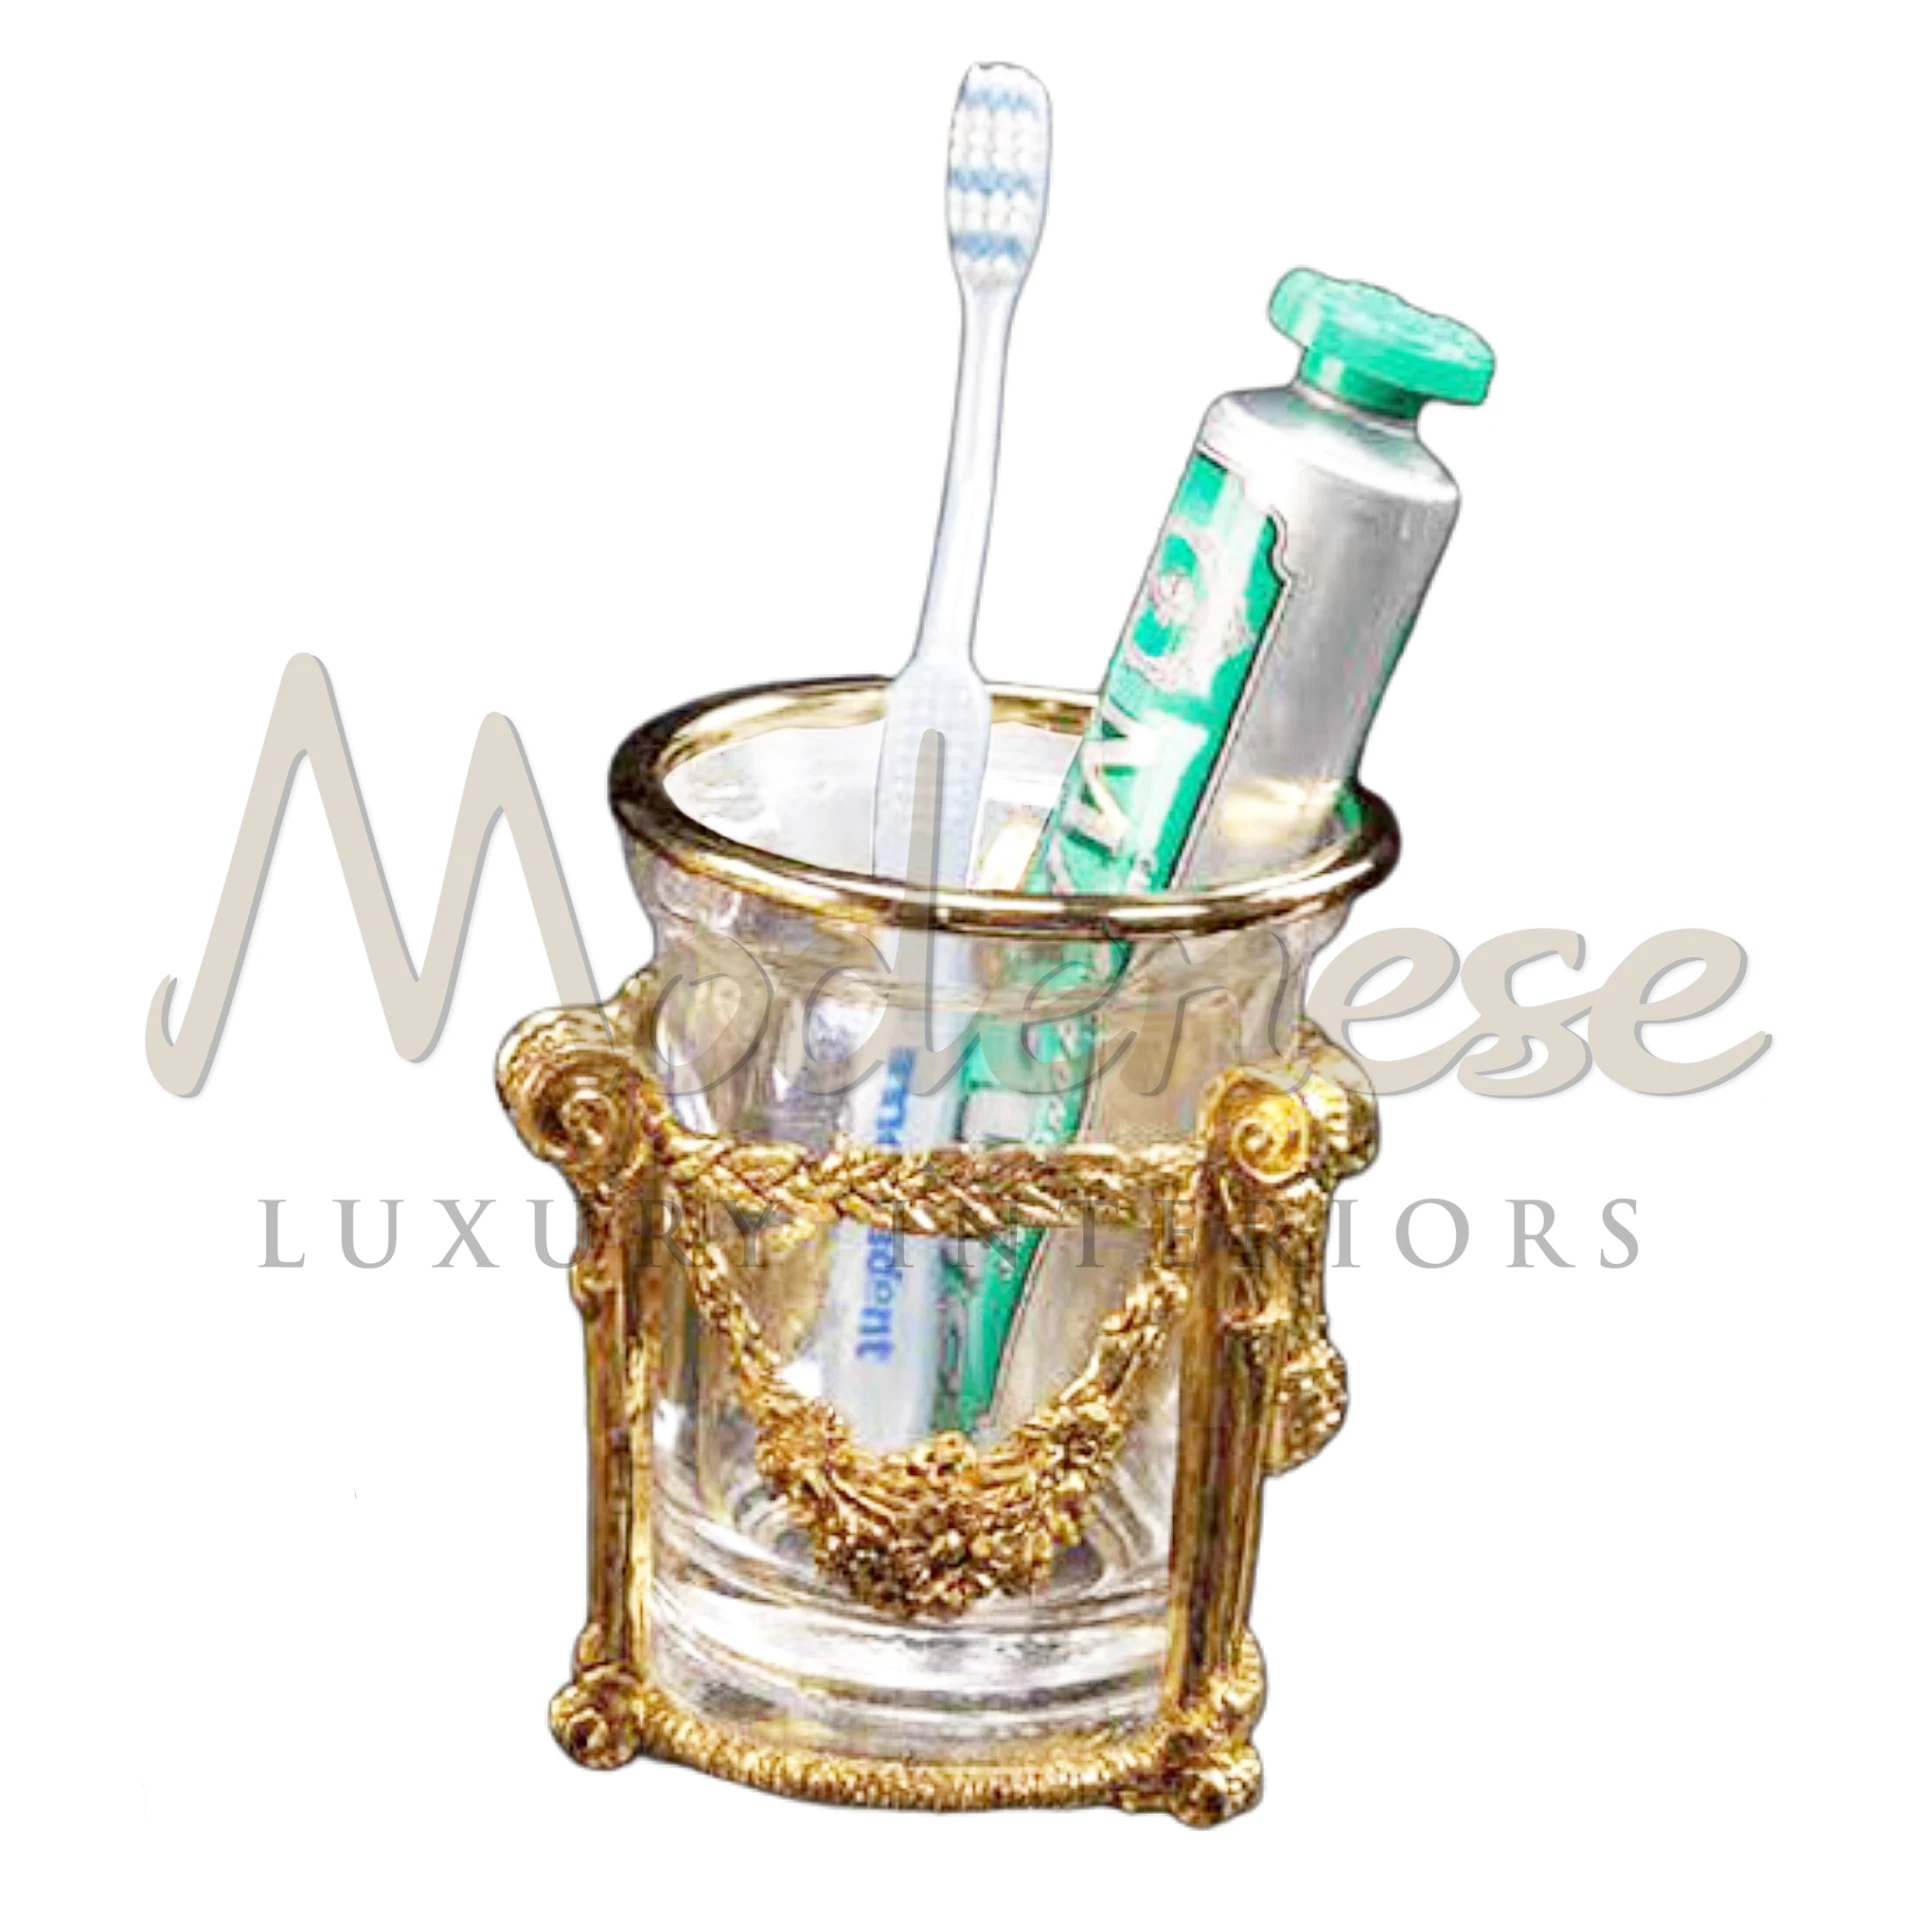 Baroque Gold Toothbrush Holder with elaborate ornamentation, adding a touch of opulence and drama to the bathroom interior design.